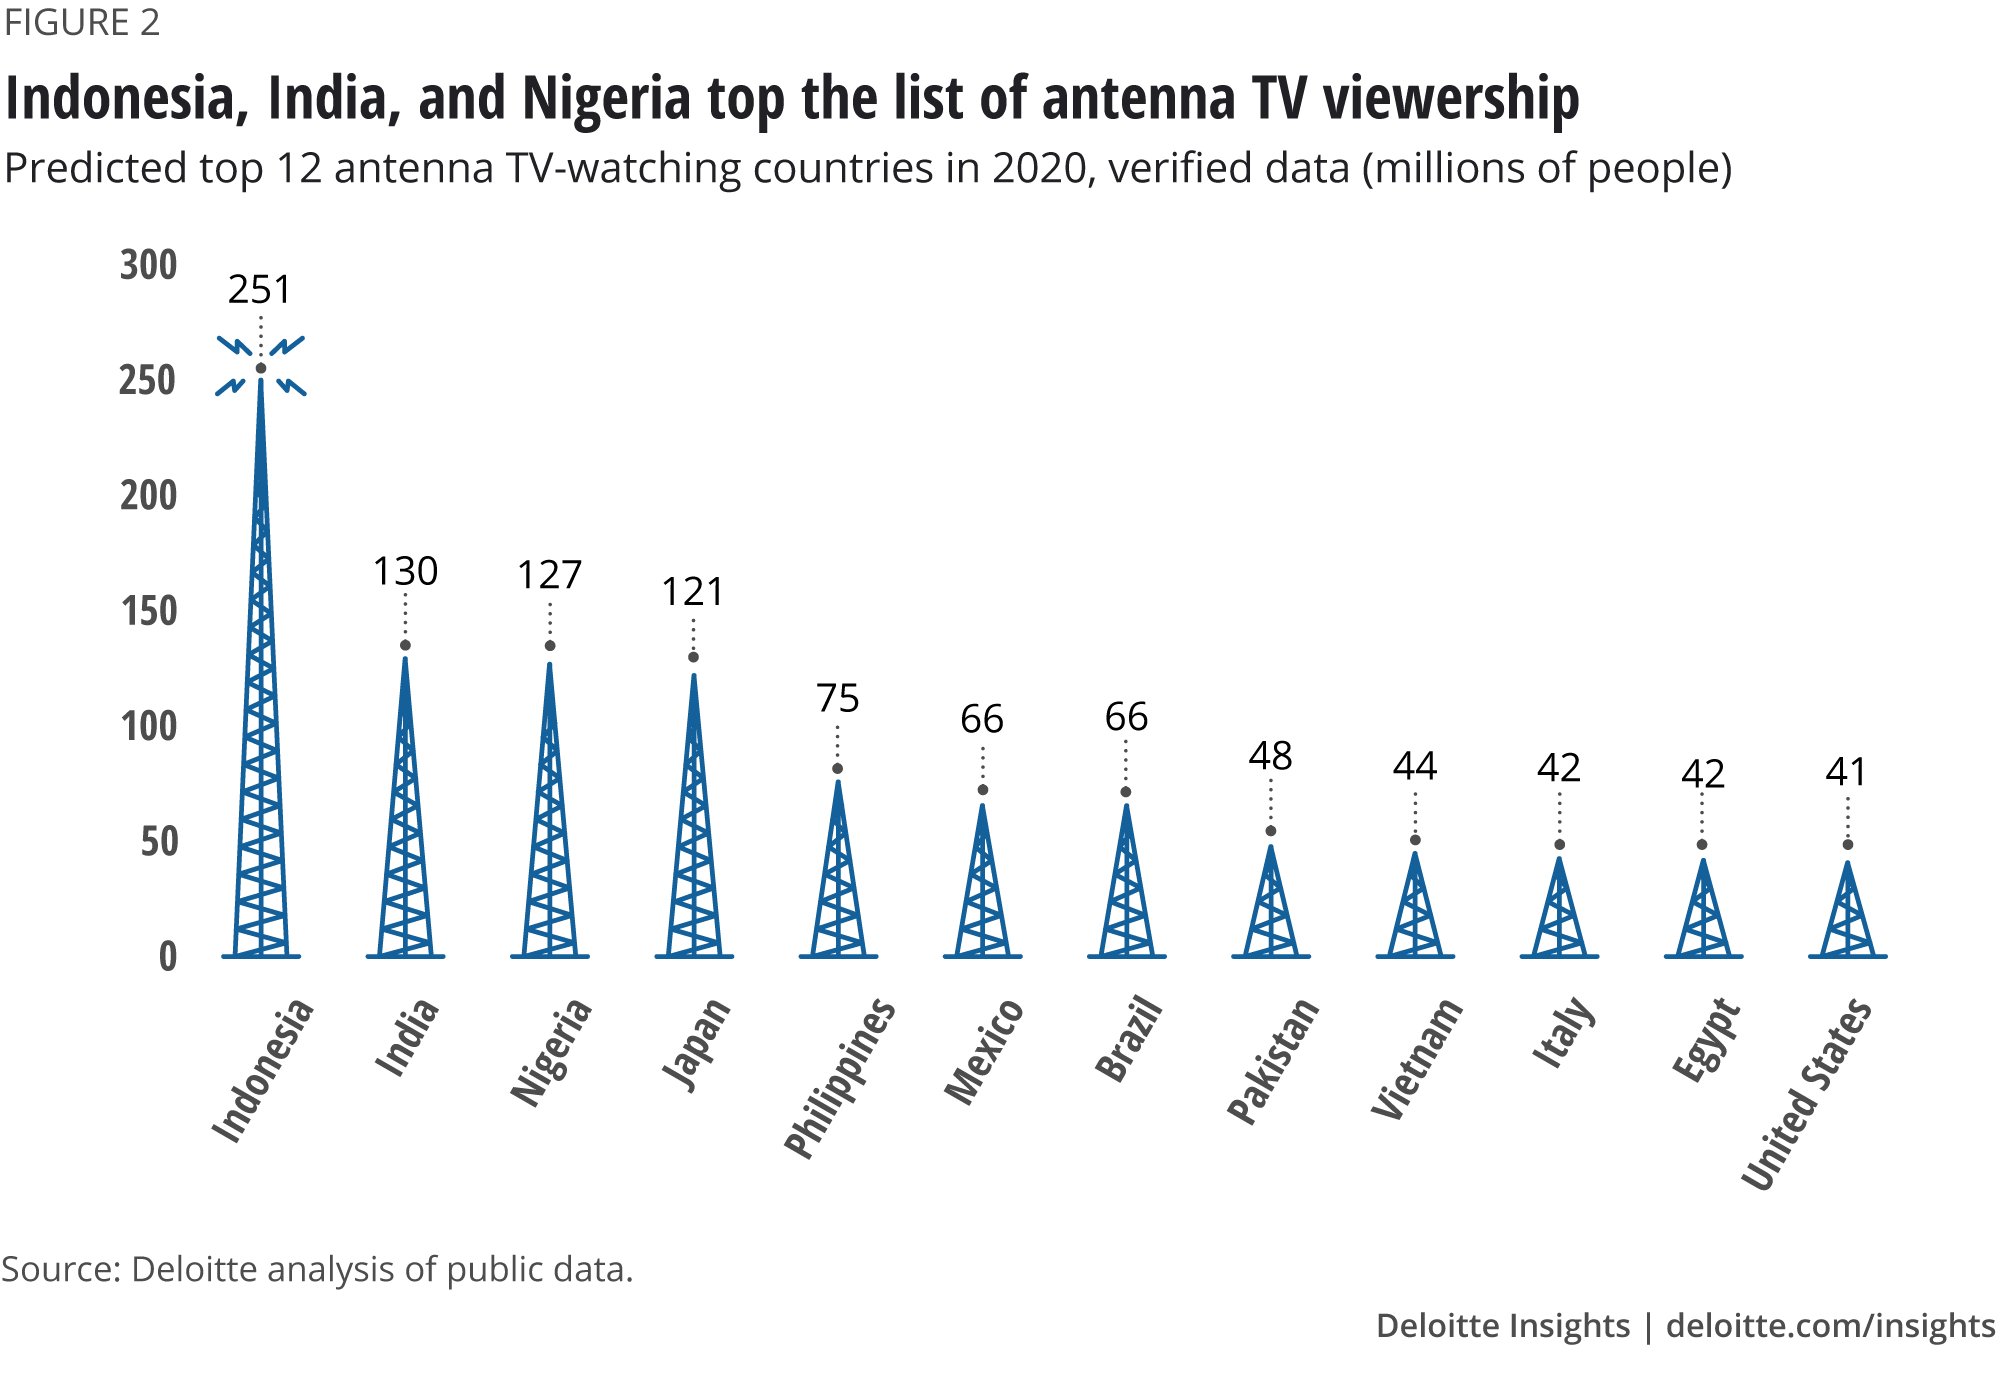 Indonesia, India, and Nigeria top the list of antenna TV viewership